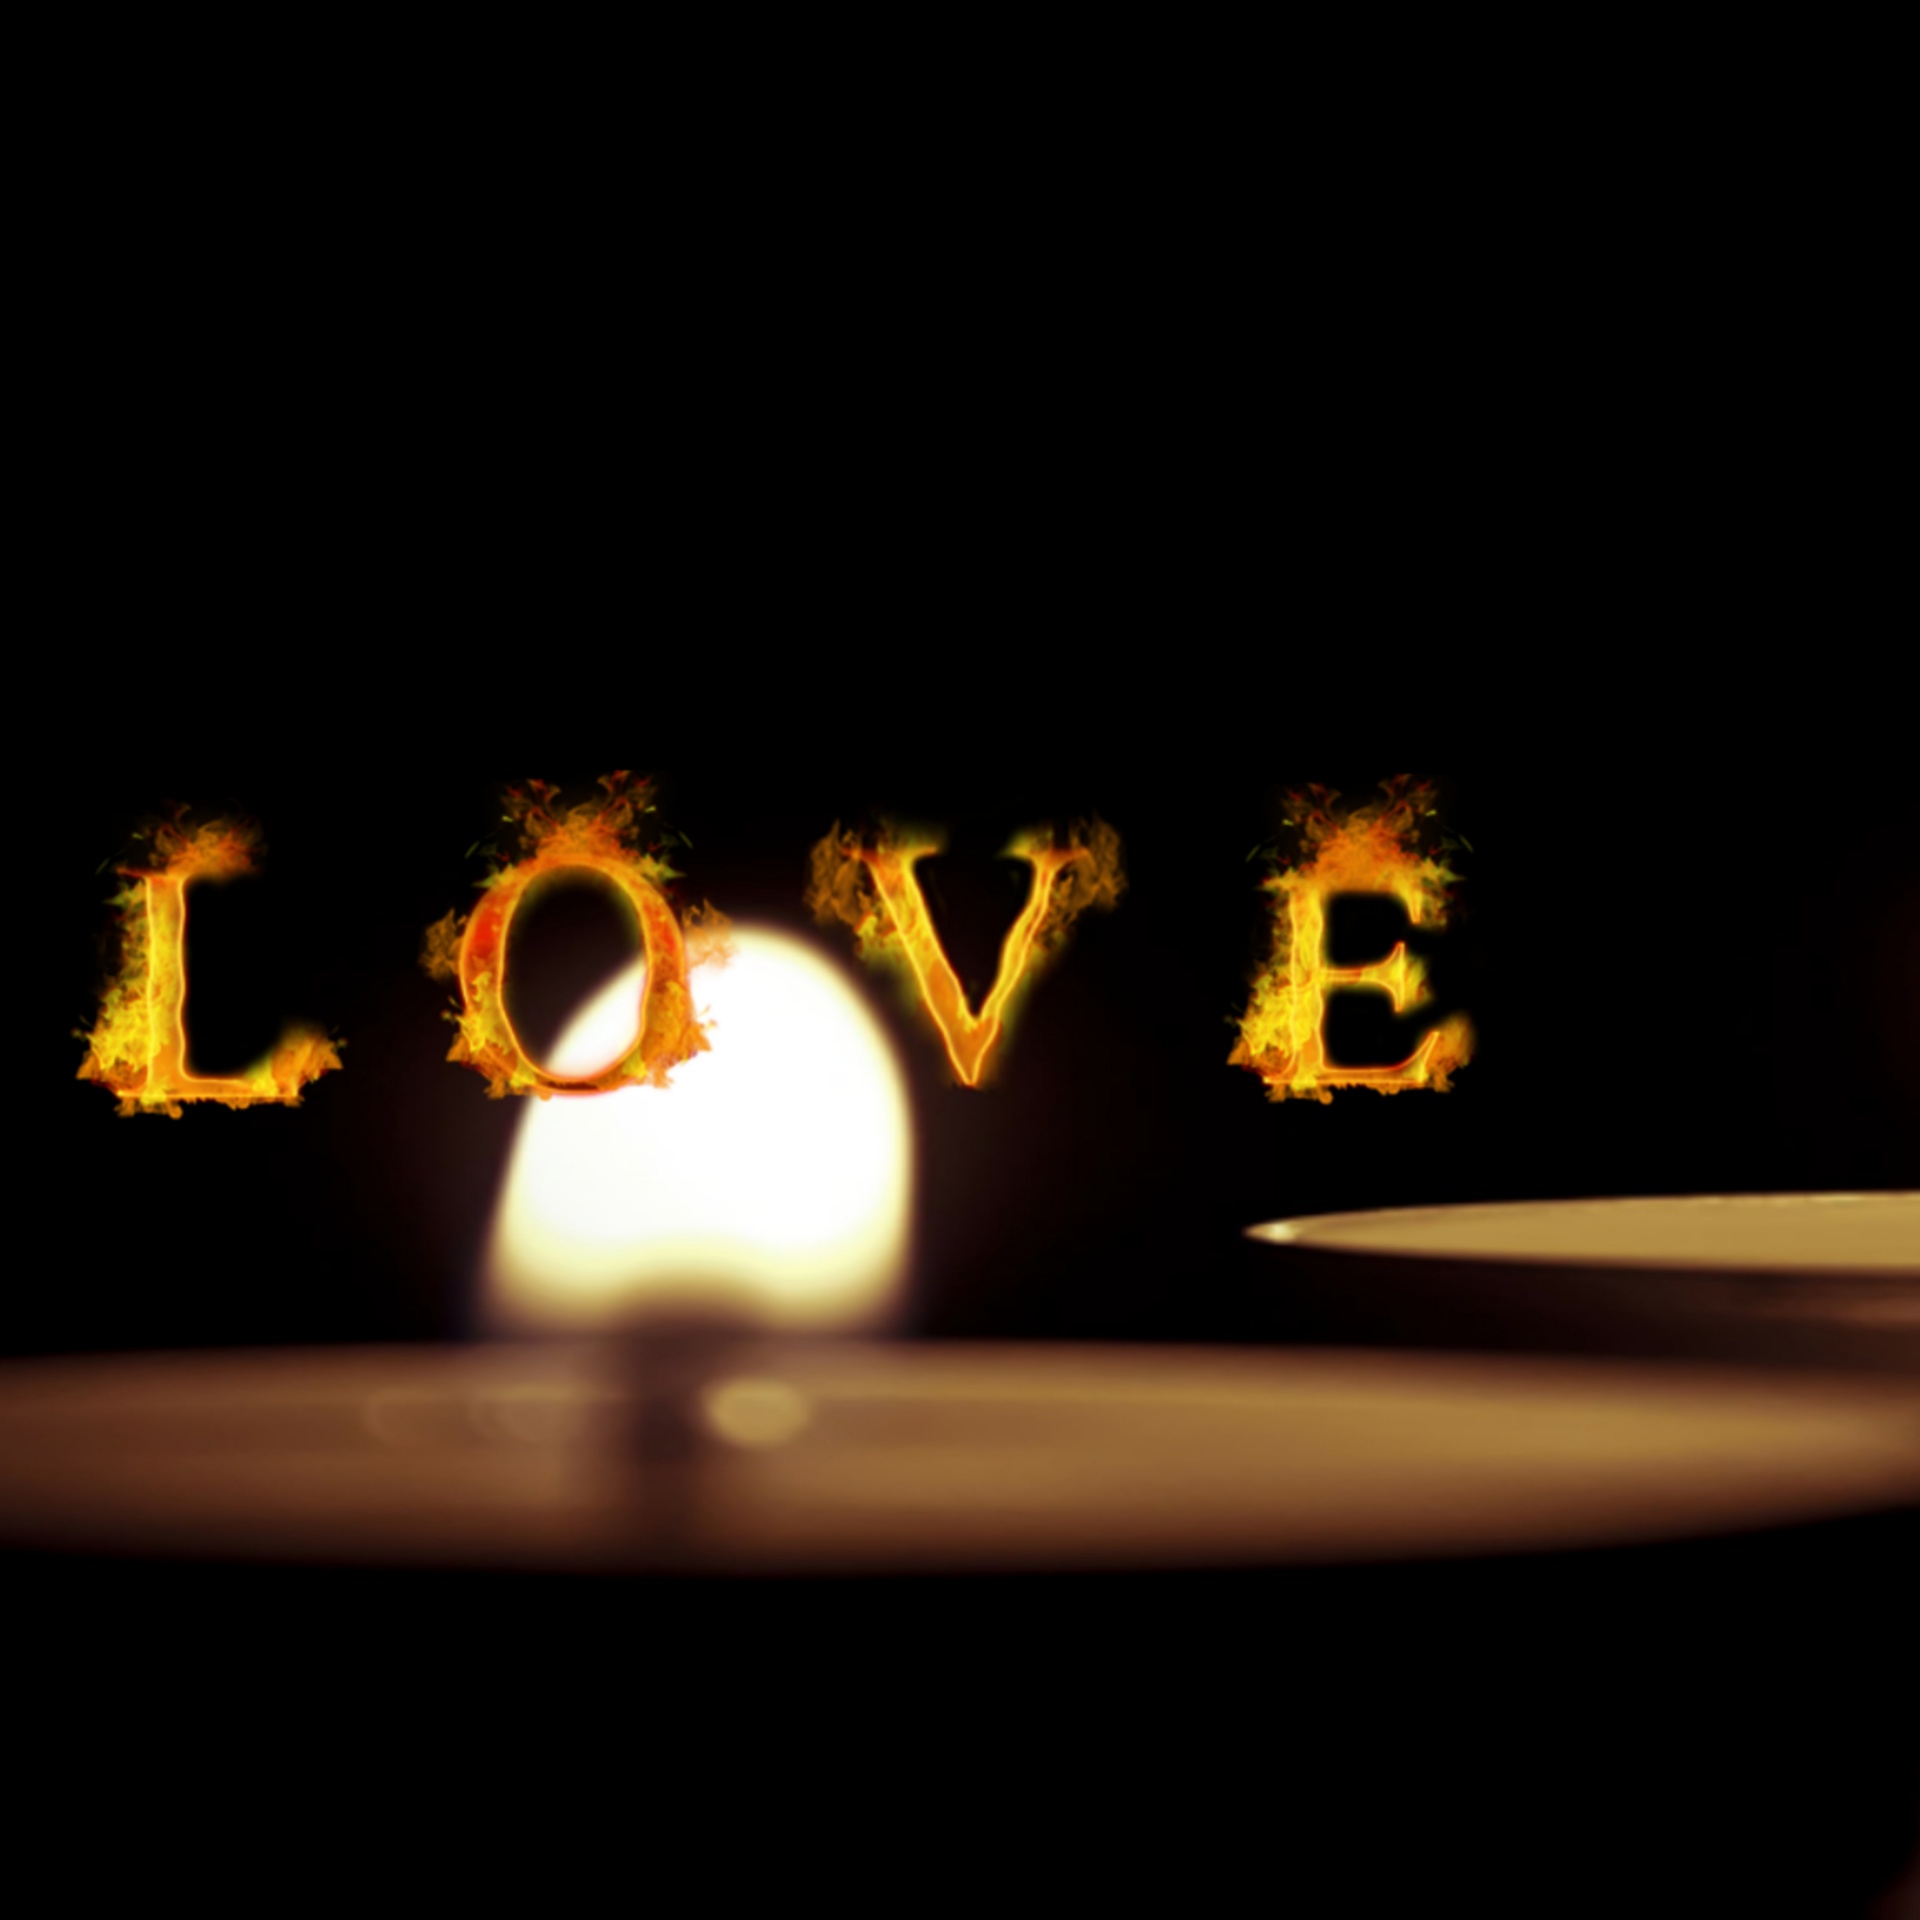 love flame text free photo